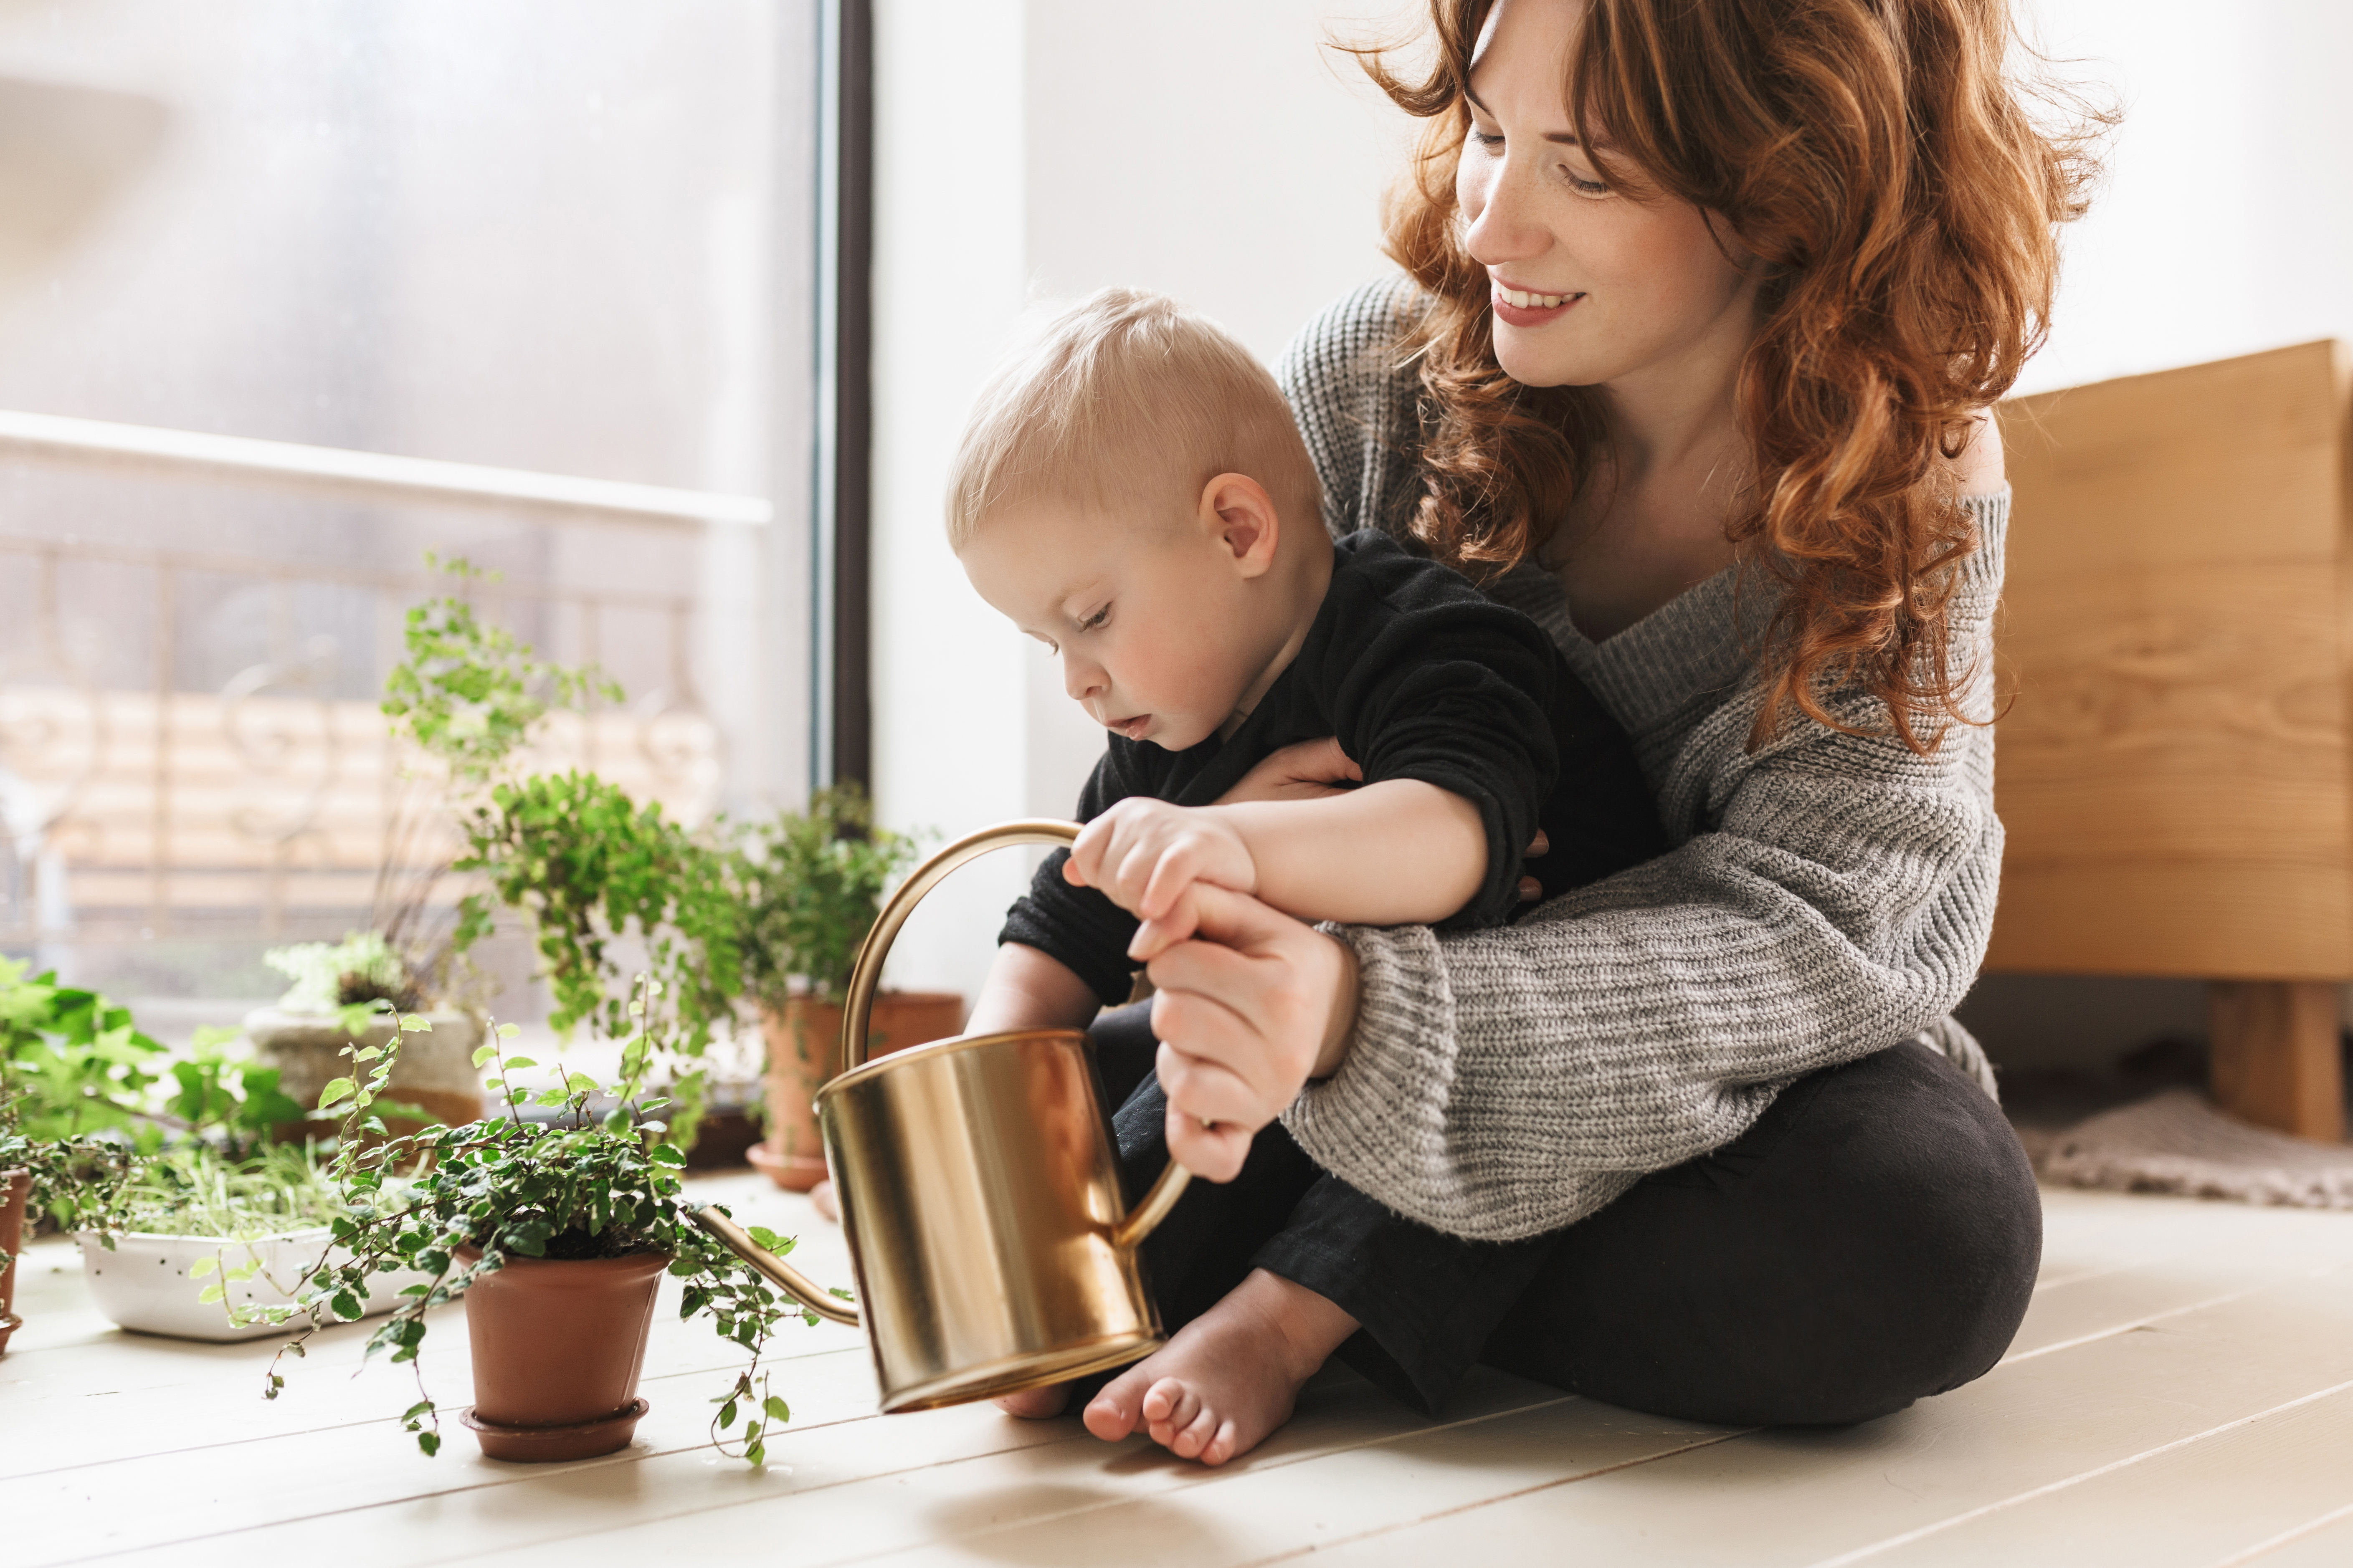 A woman teaching her baby how to water the plants | Source: Shutterstock